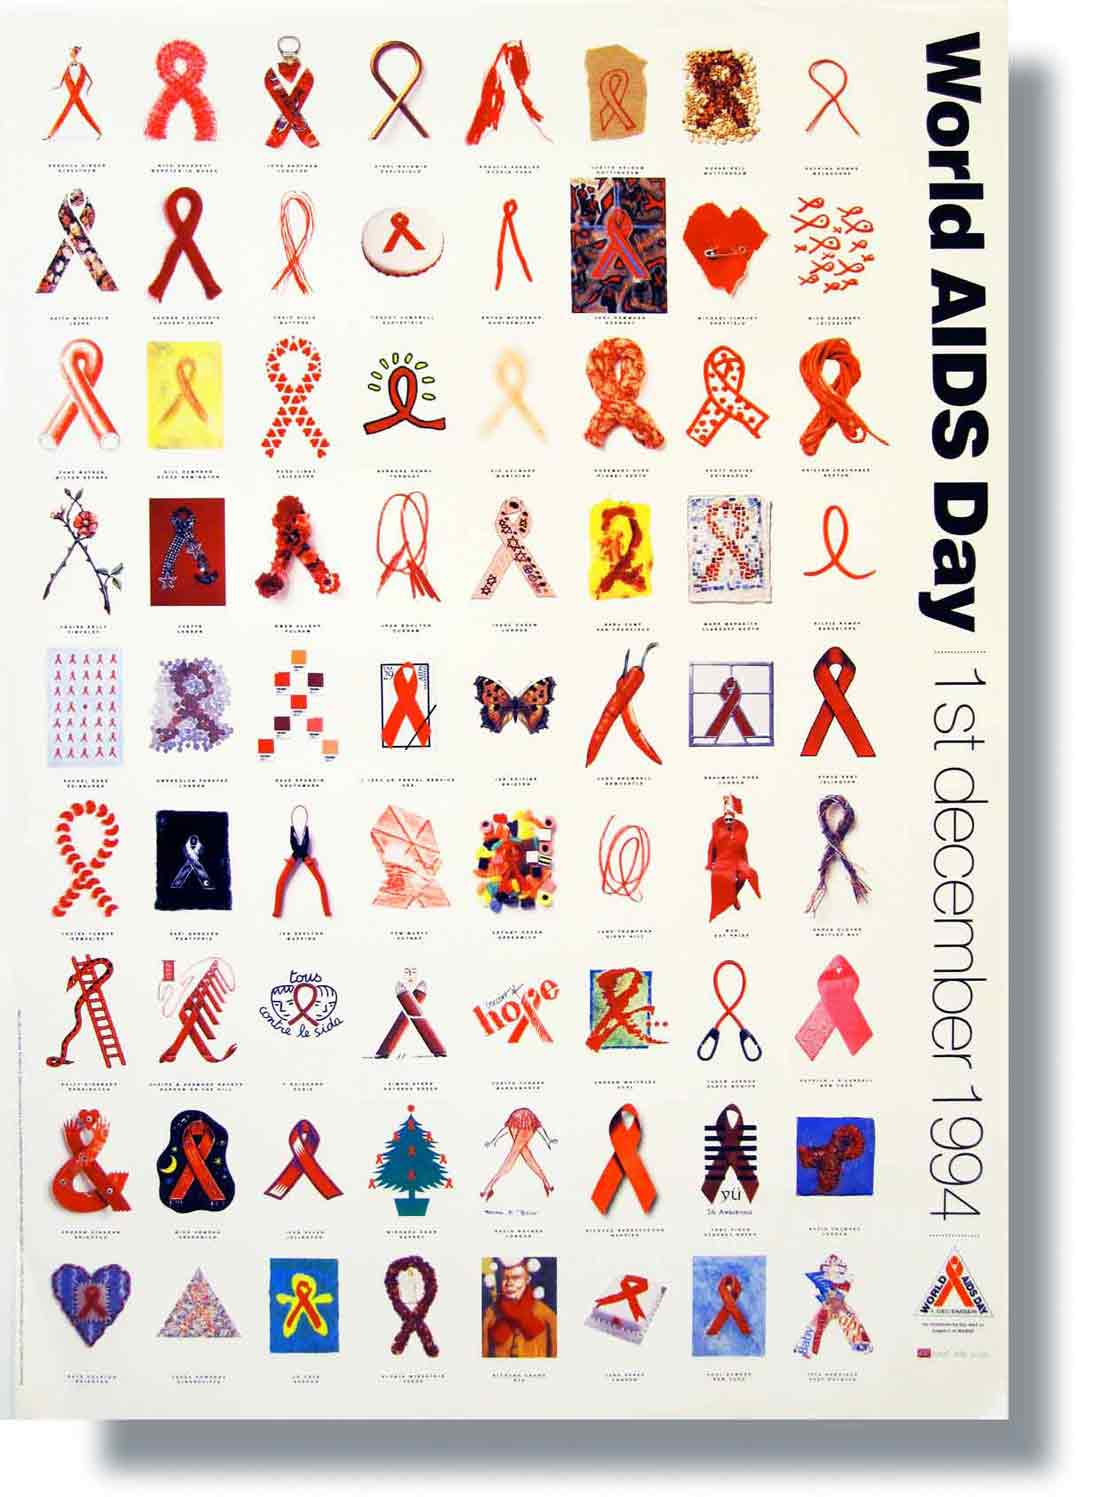 World Aids Day Red Ribbon Poster 1994 designed by ideology.uk.com